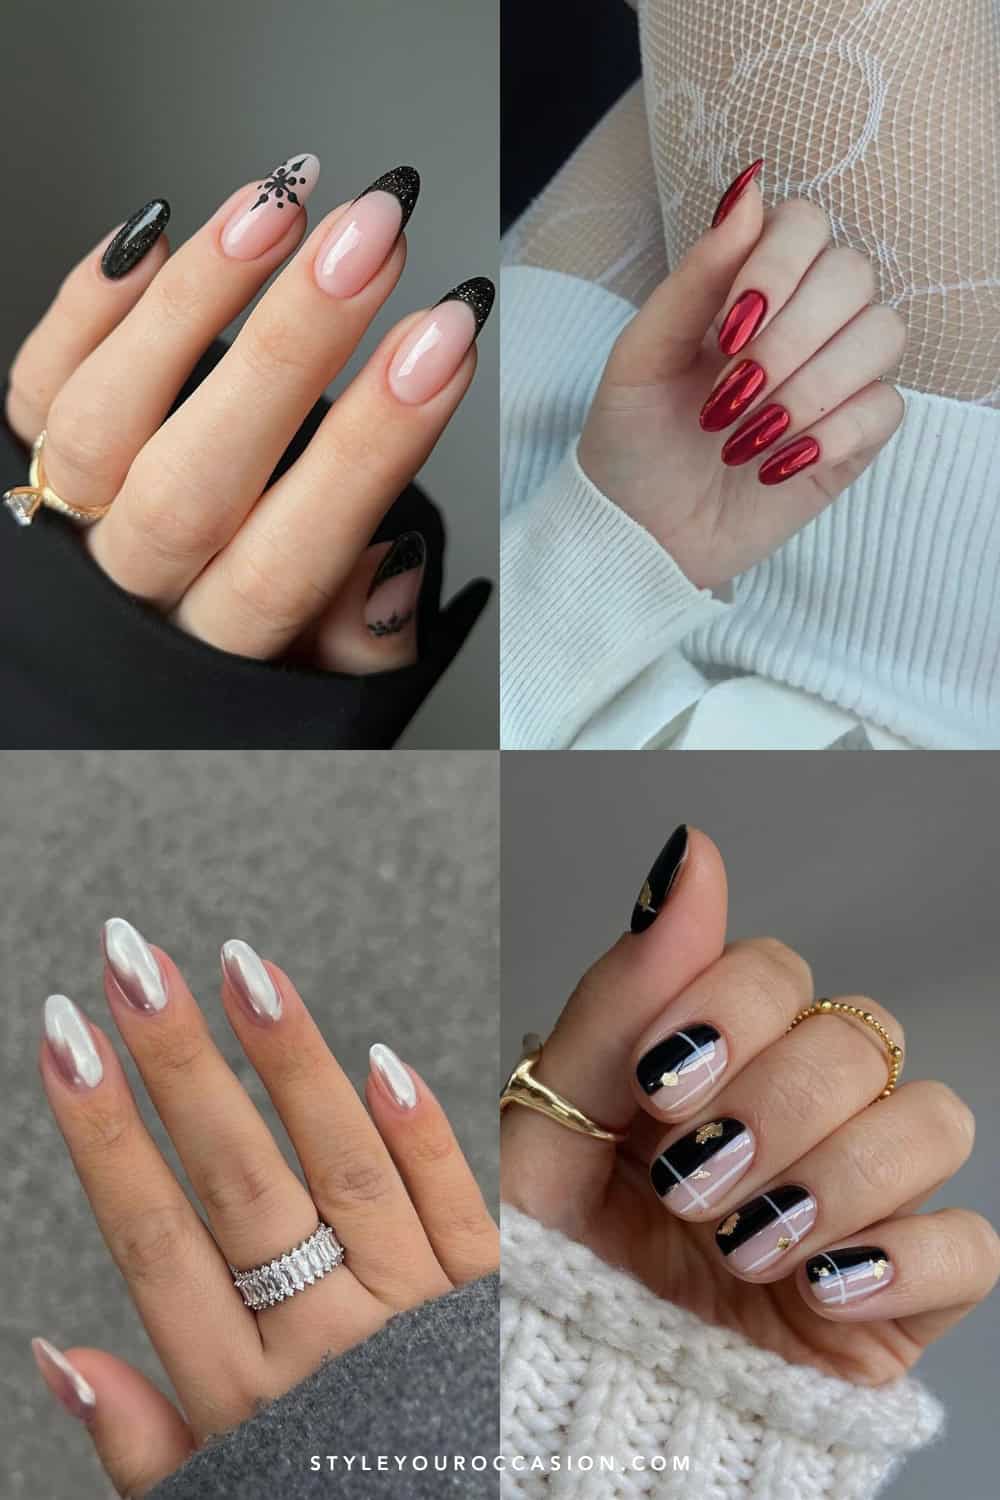 collage of four hands with elegant and classy winter nail designs